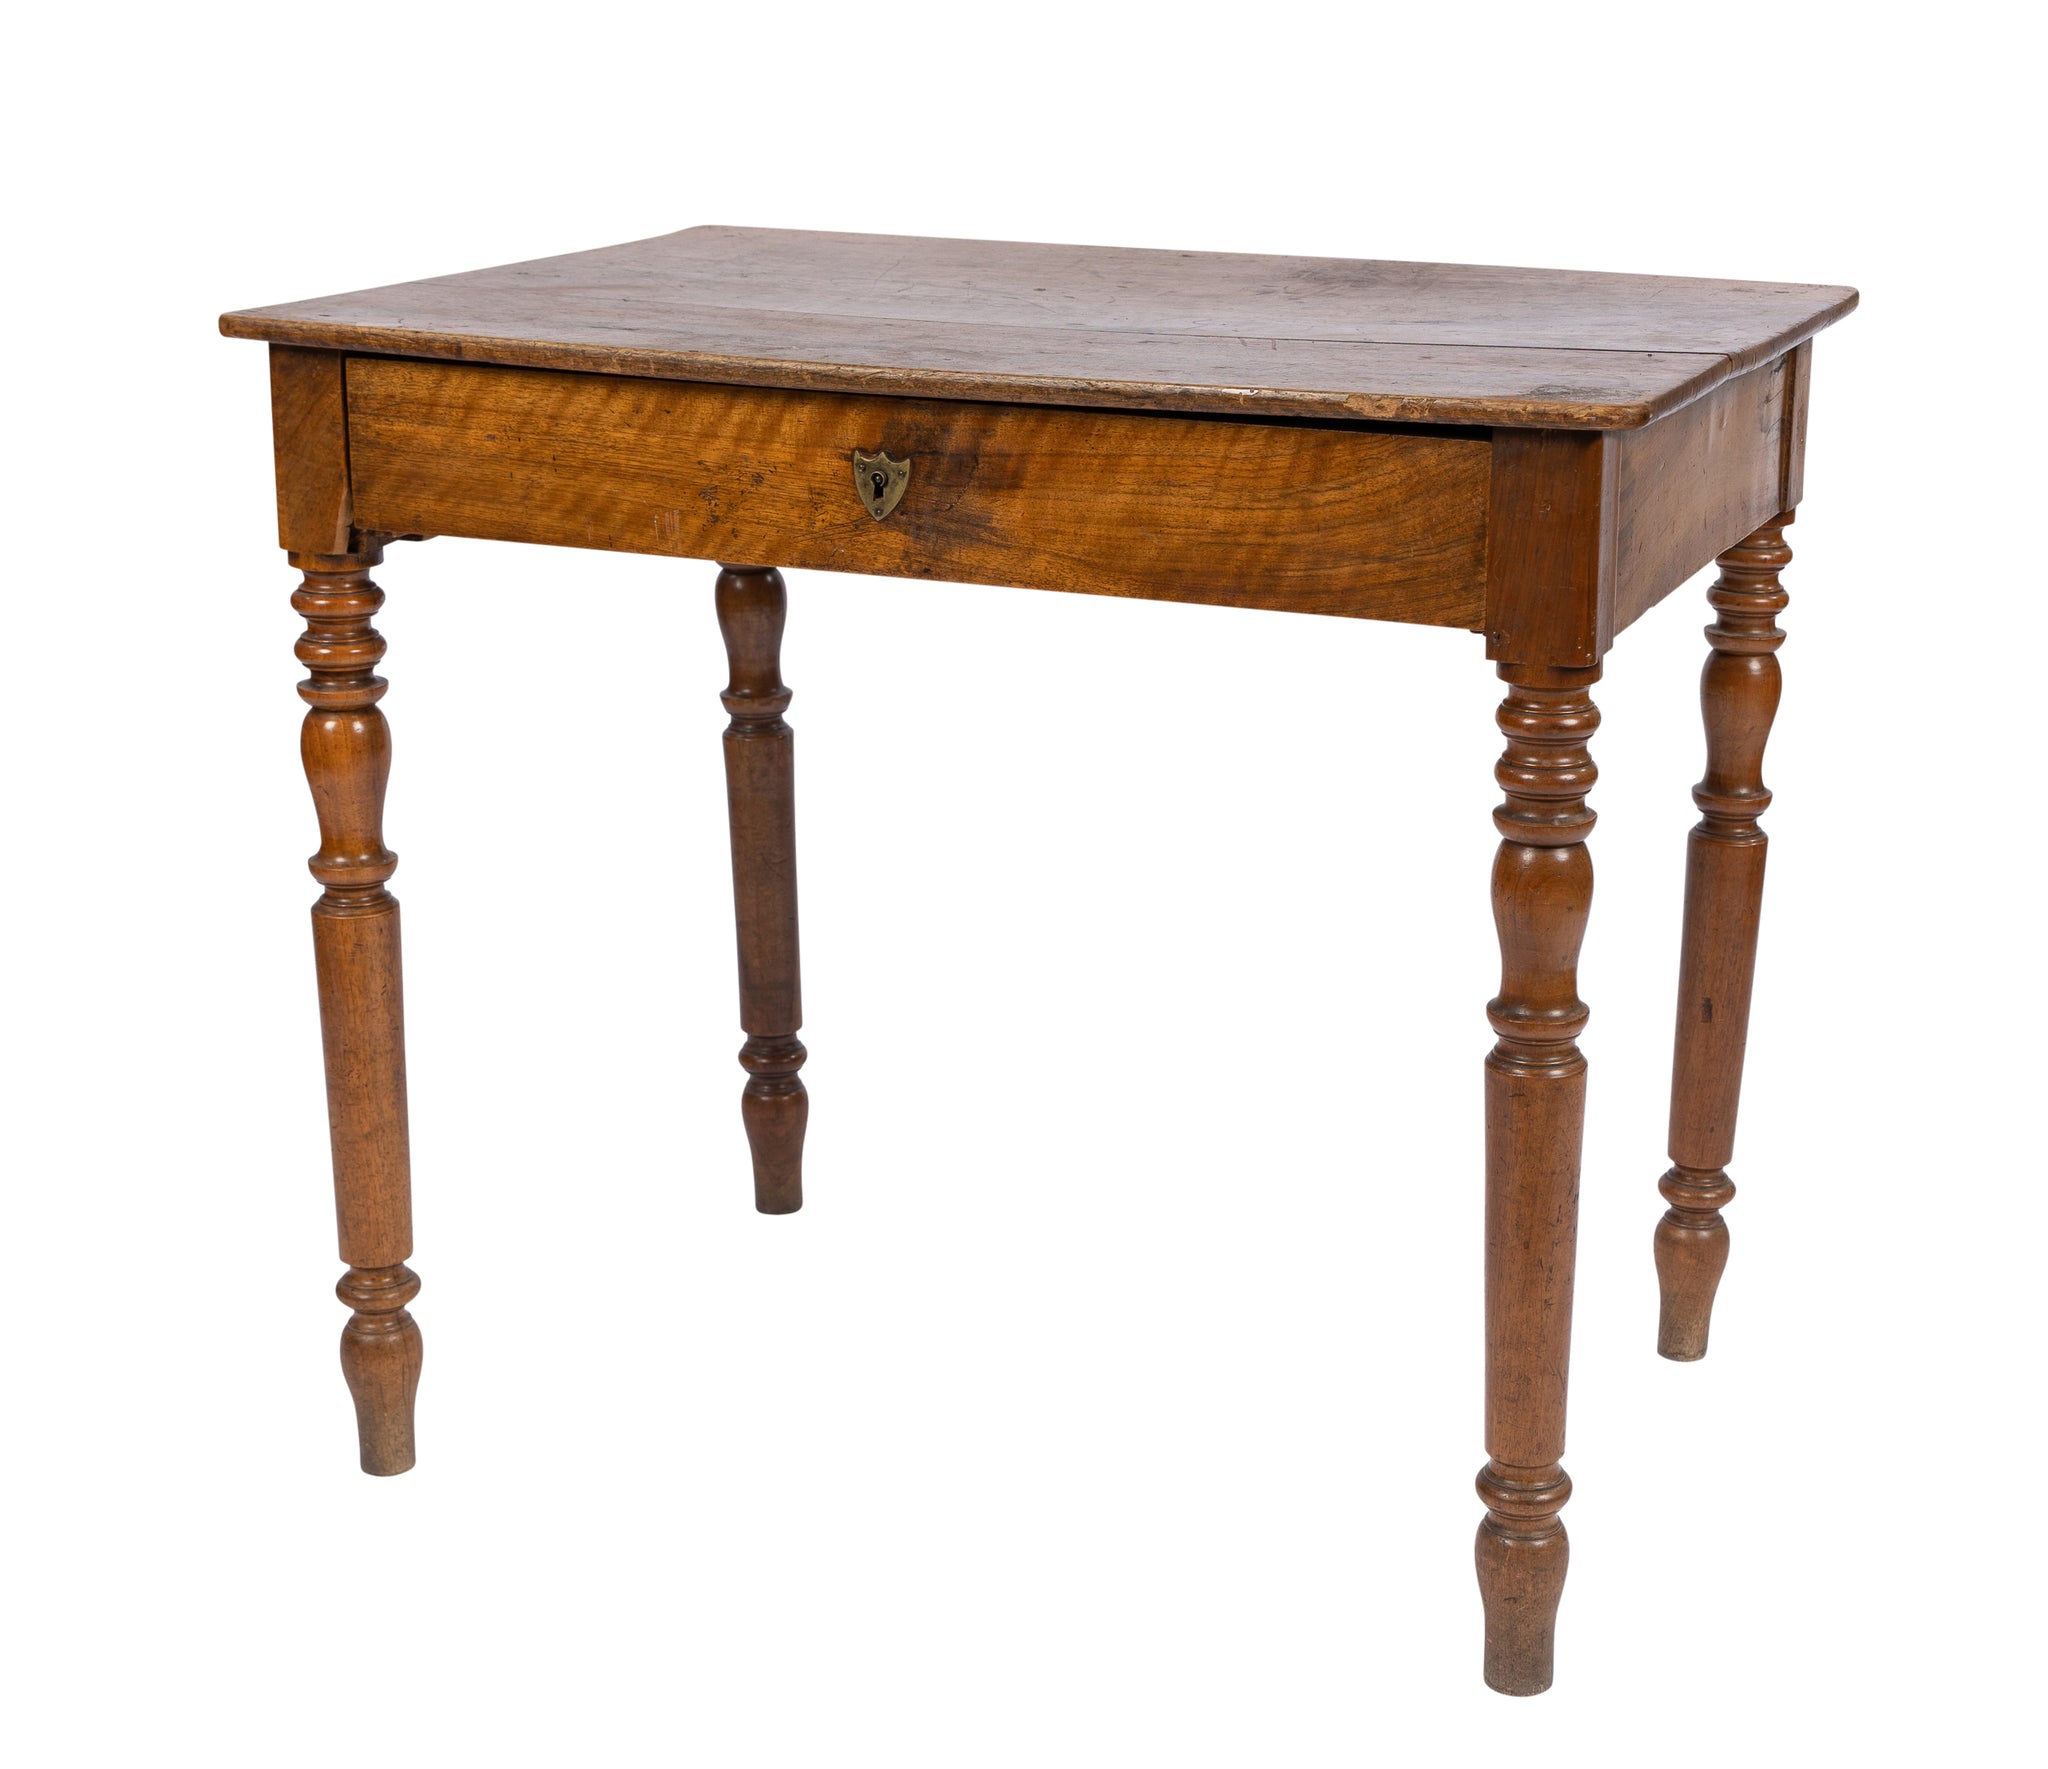 19th century French farmhouse table from the French Alps with shield hardware